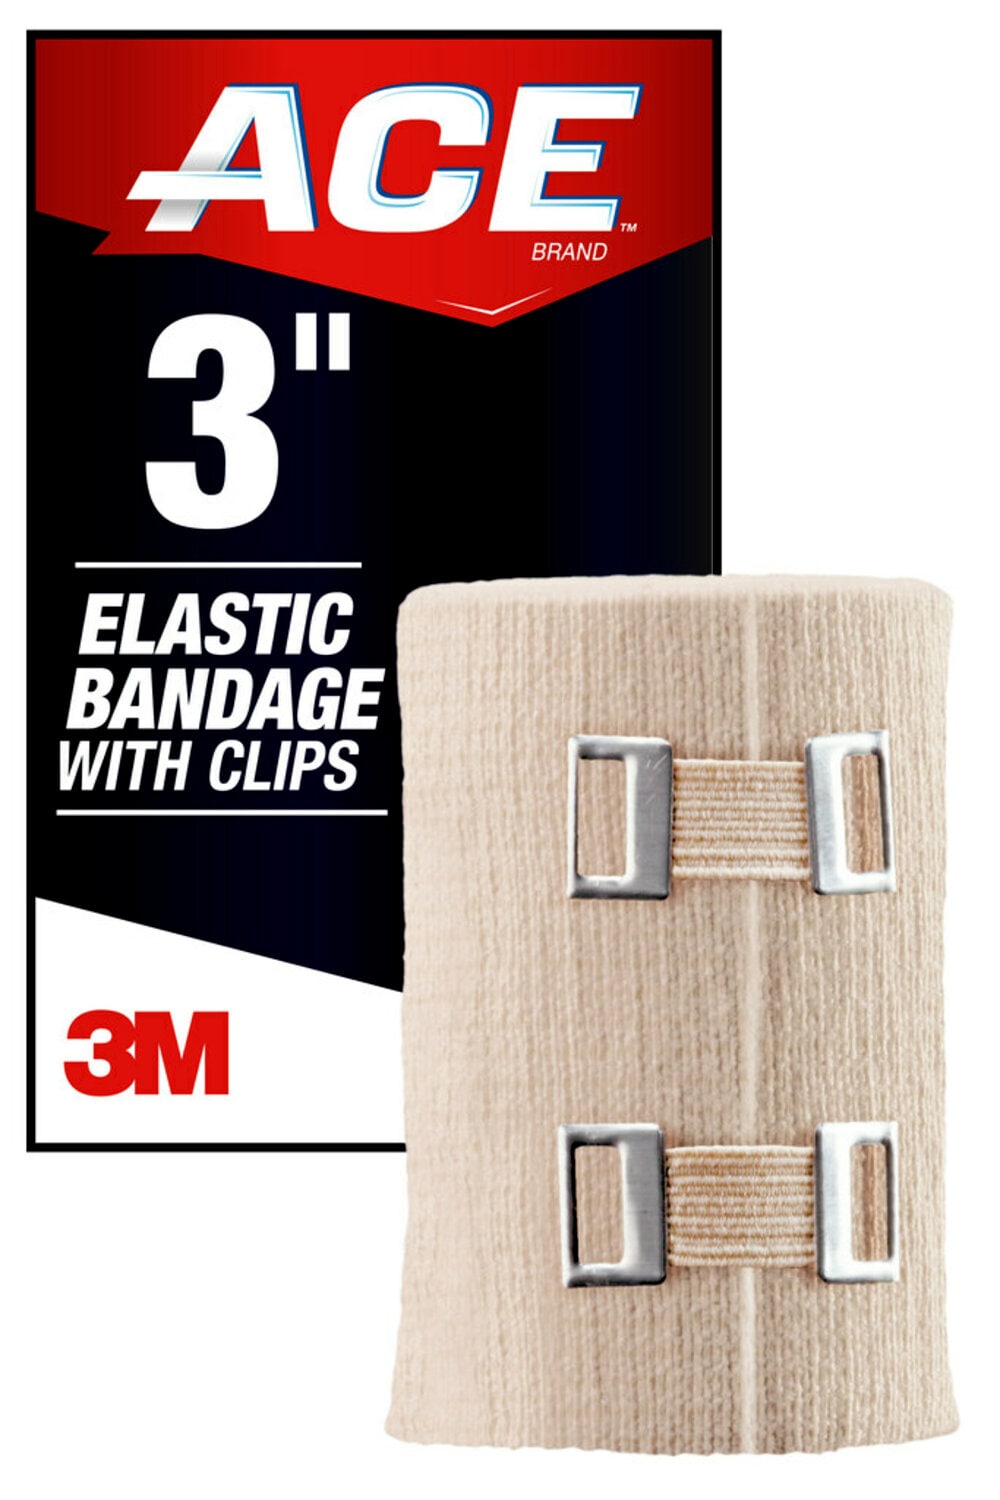 7010332712 - ACE Brand Elastic Bandage w/clips 207314, 3 in